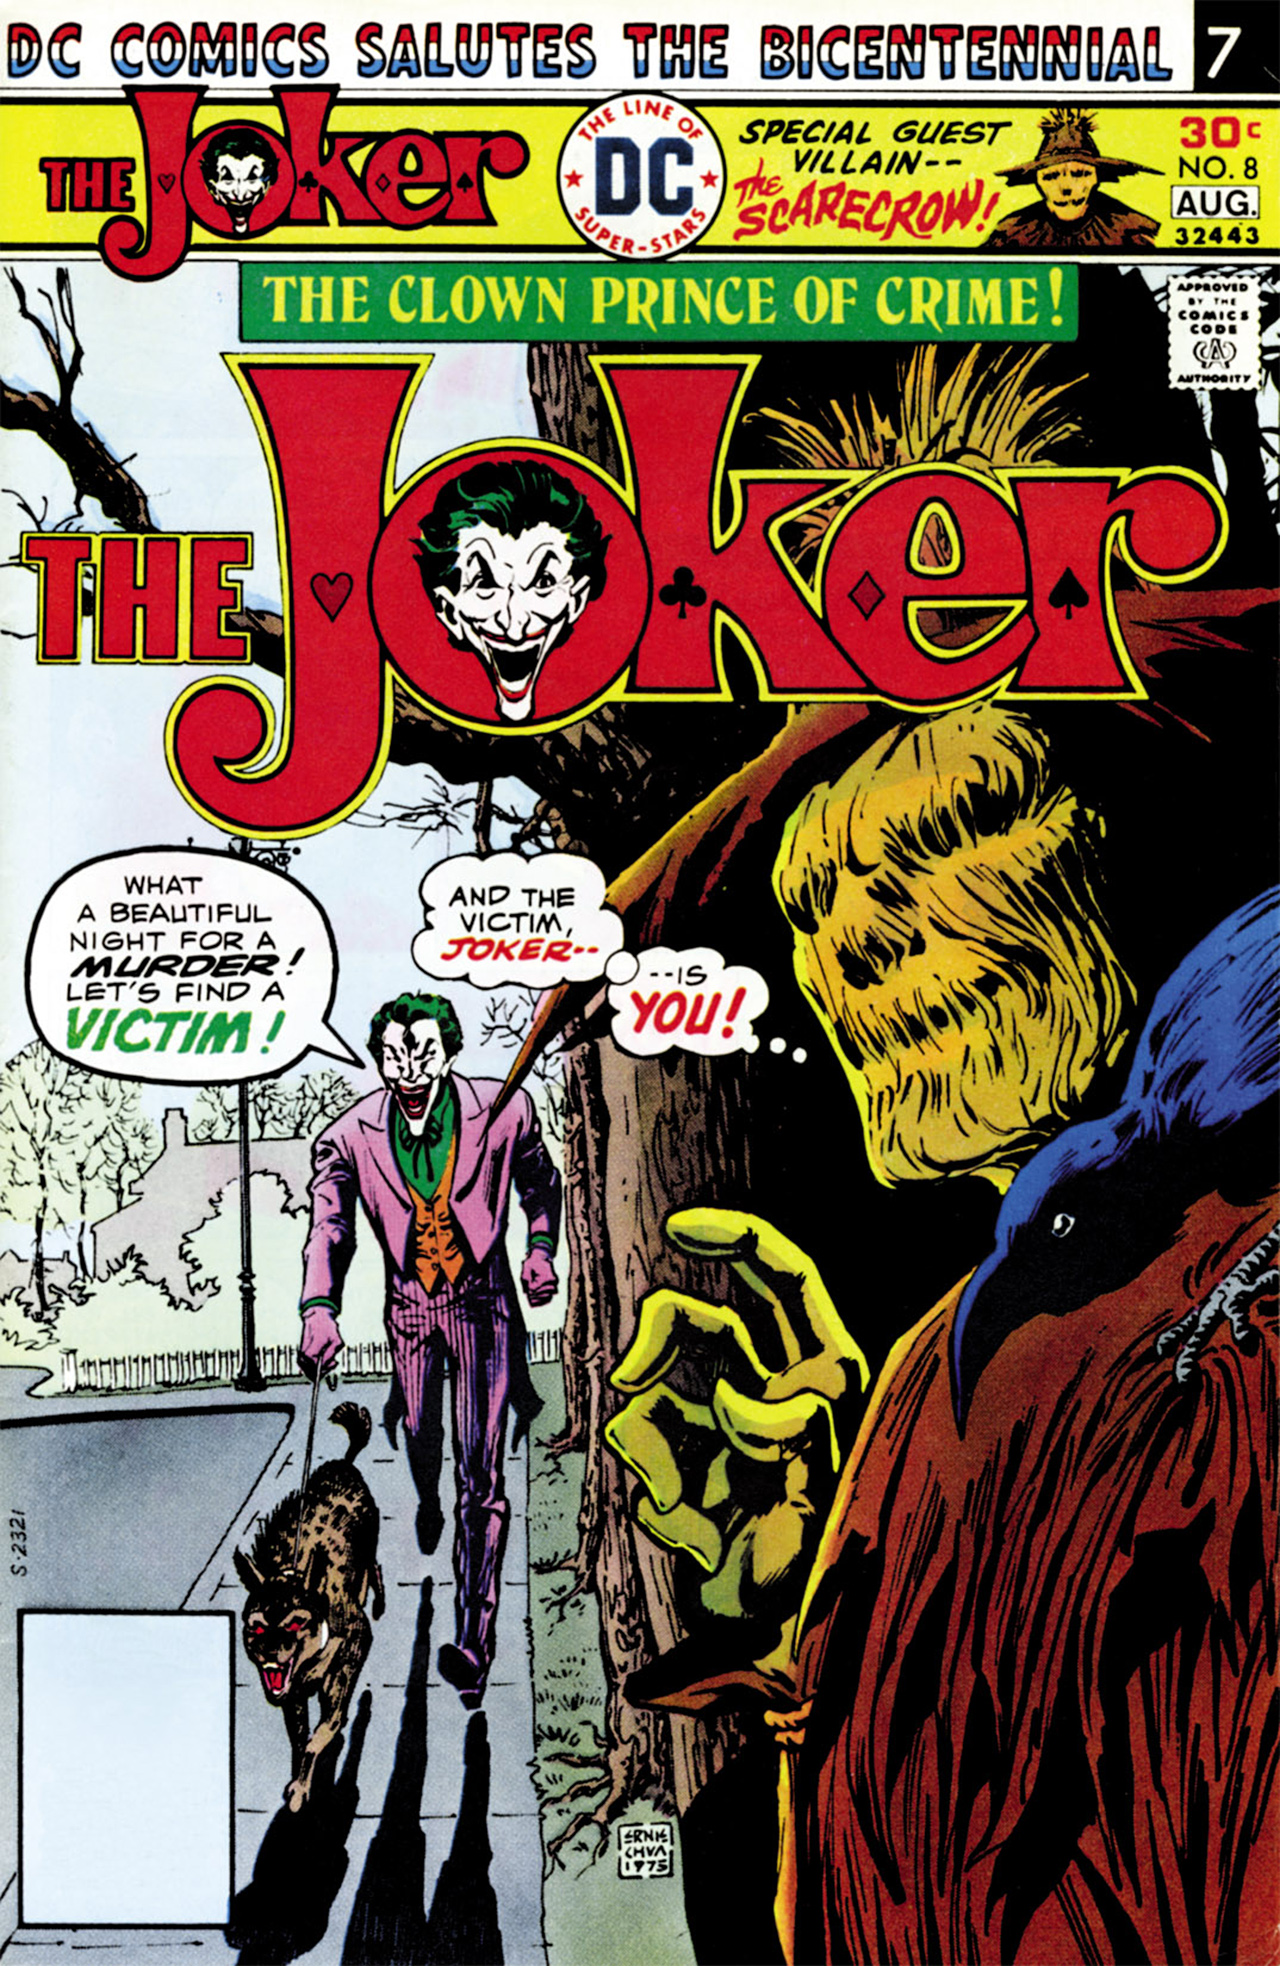 The Joker (1975-1976 + 2019): Chapter 8 - Page 1